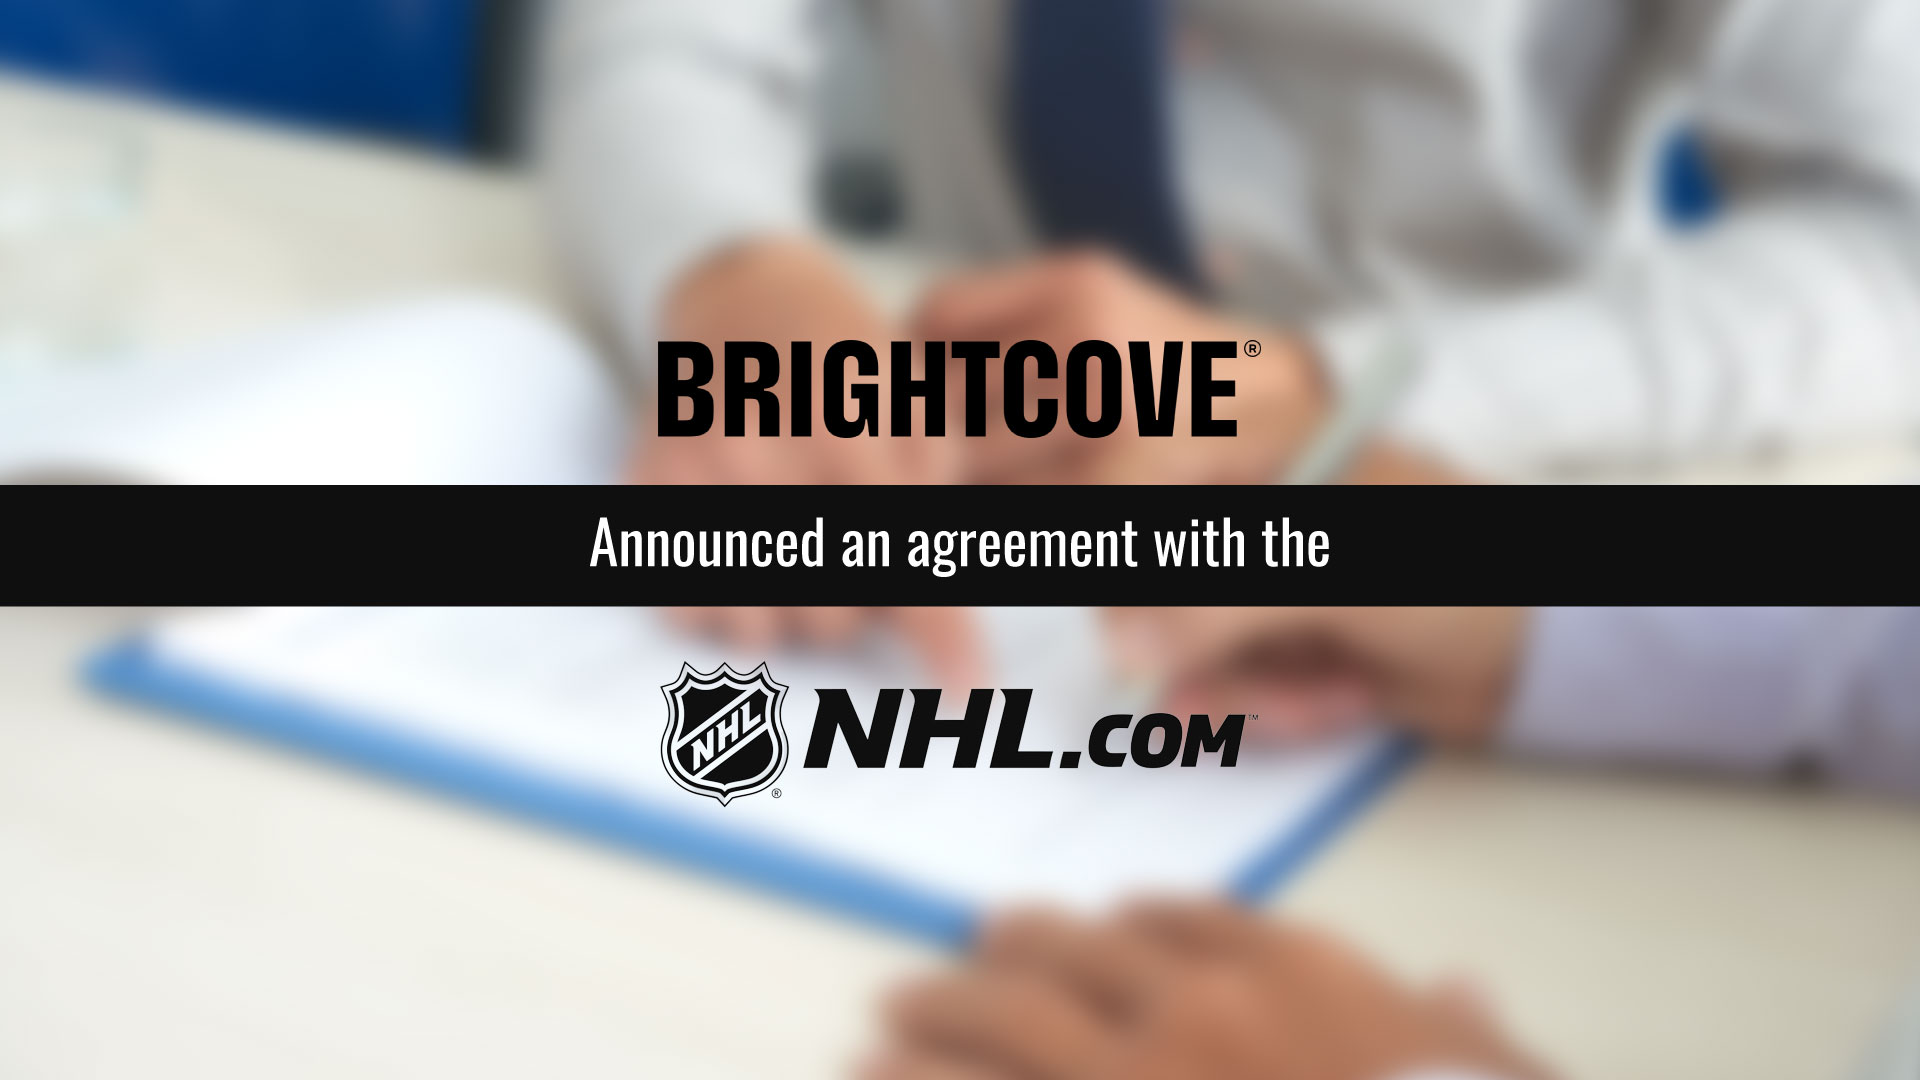 Brightcove to Power Online Streaming Content Across Digital Platforms for the National Hockey League